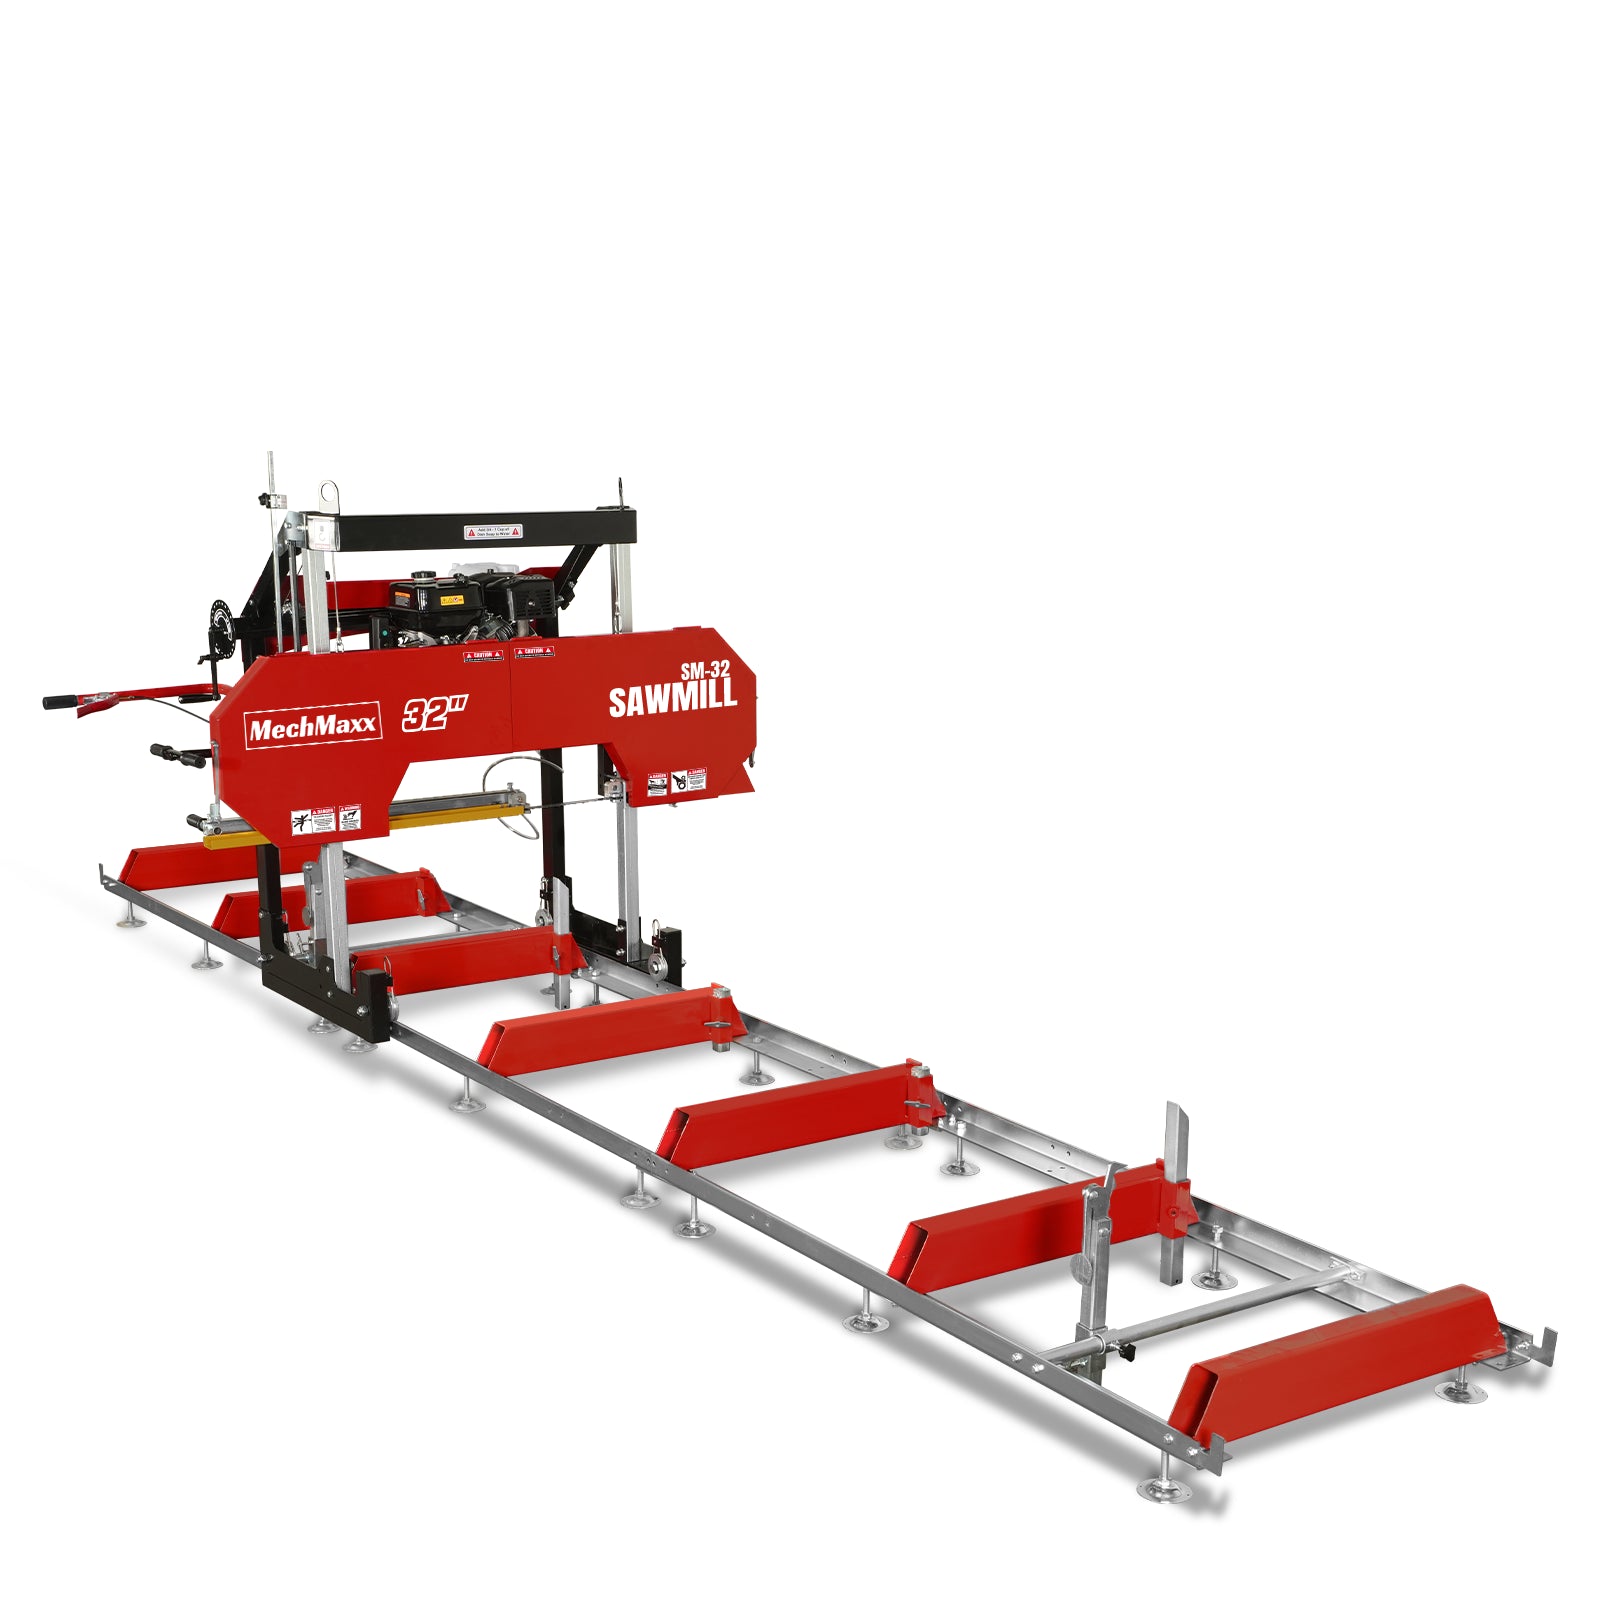 32" Portable Sawmill (5 x Blades Included), 420cc 15HP E-Start Gasoline Engine, 29" Board Width, 20' Track Length (6.6' Track Extension Included)